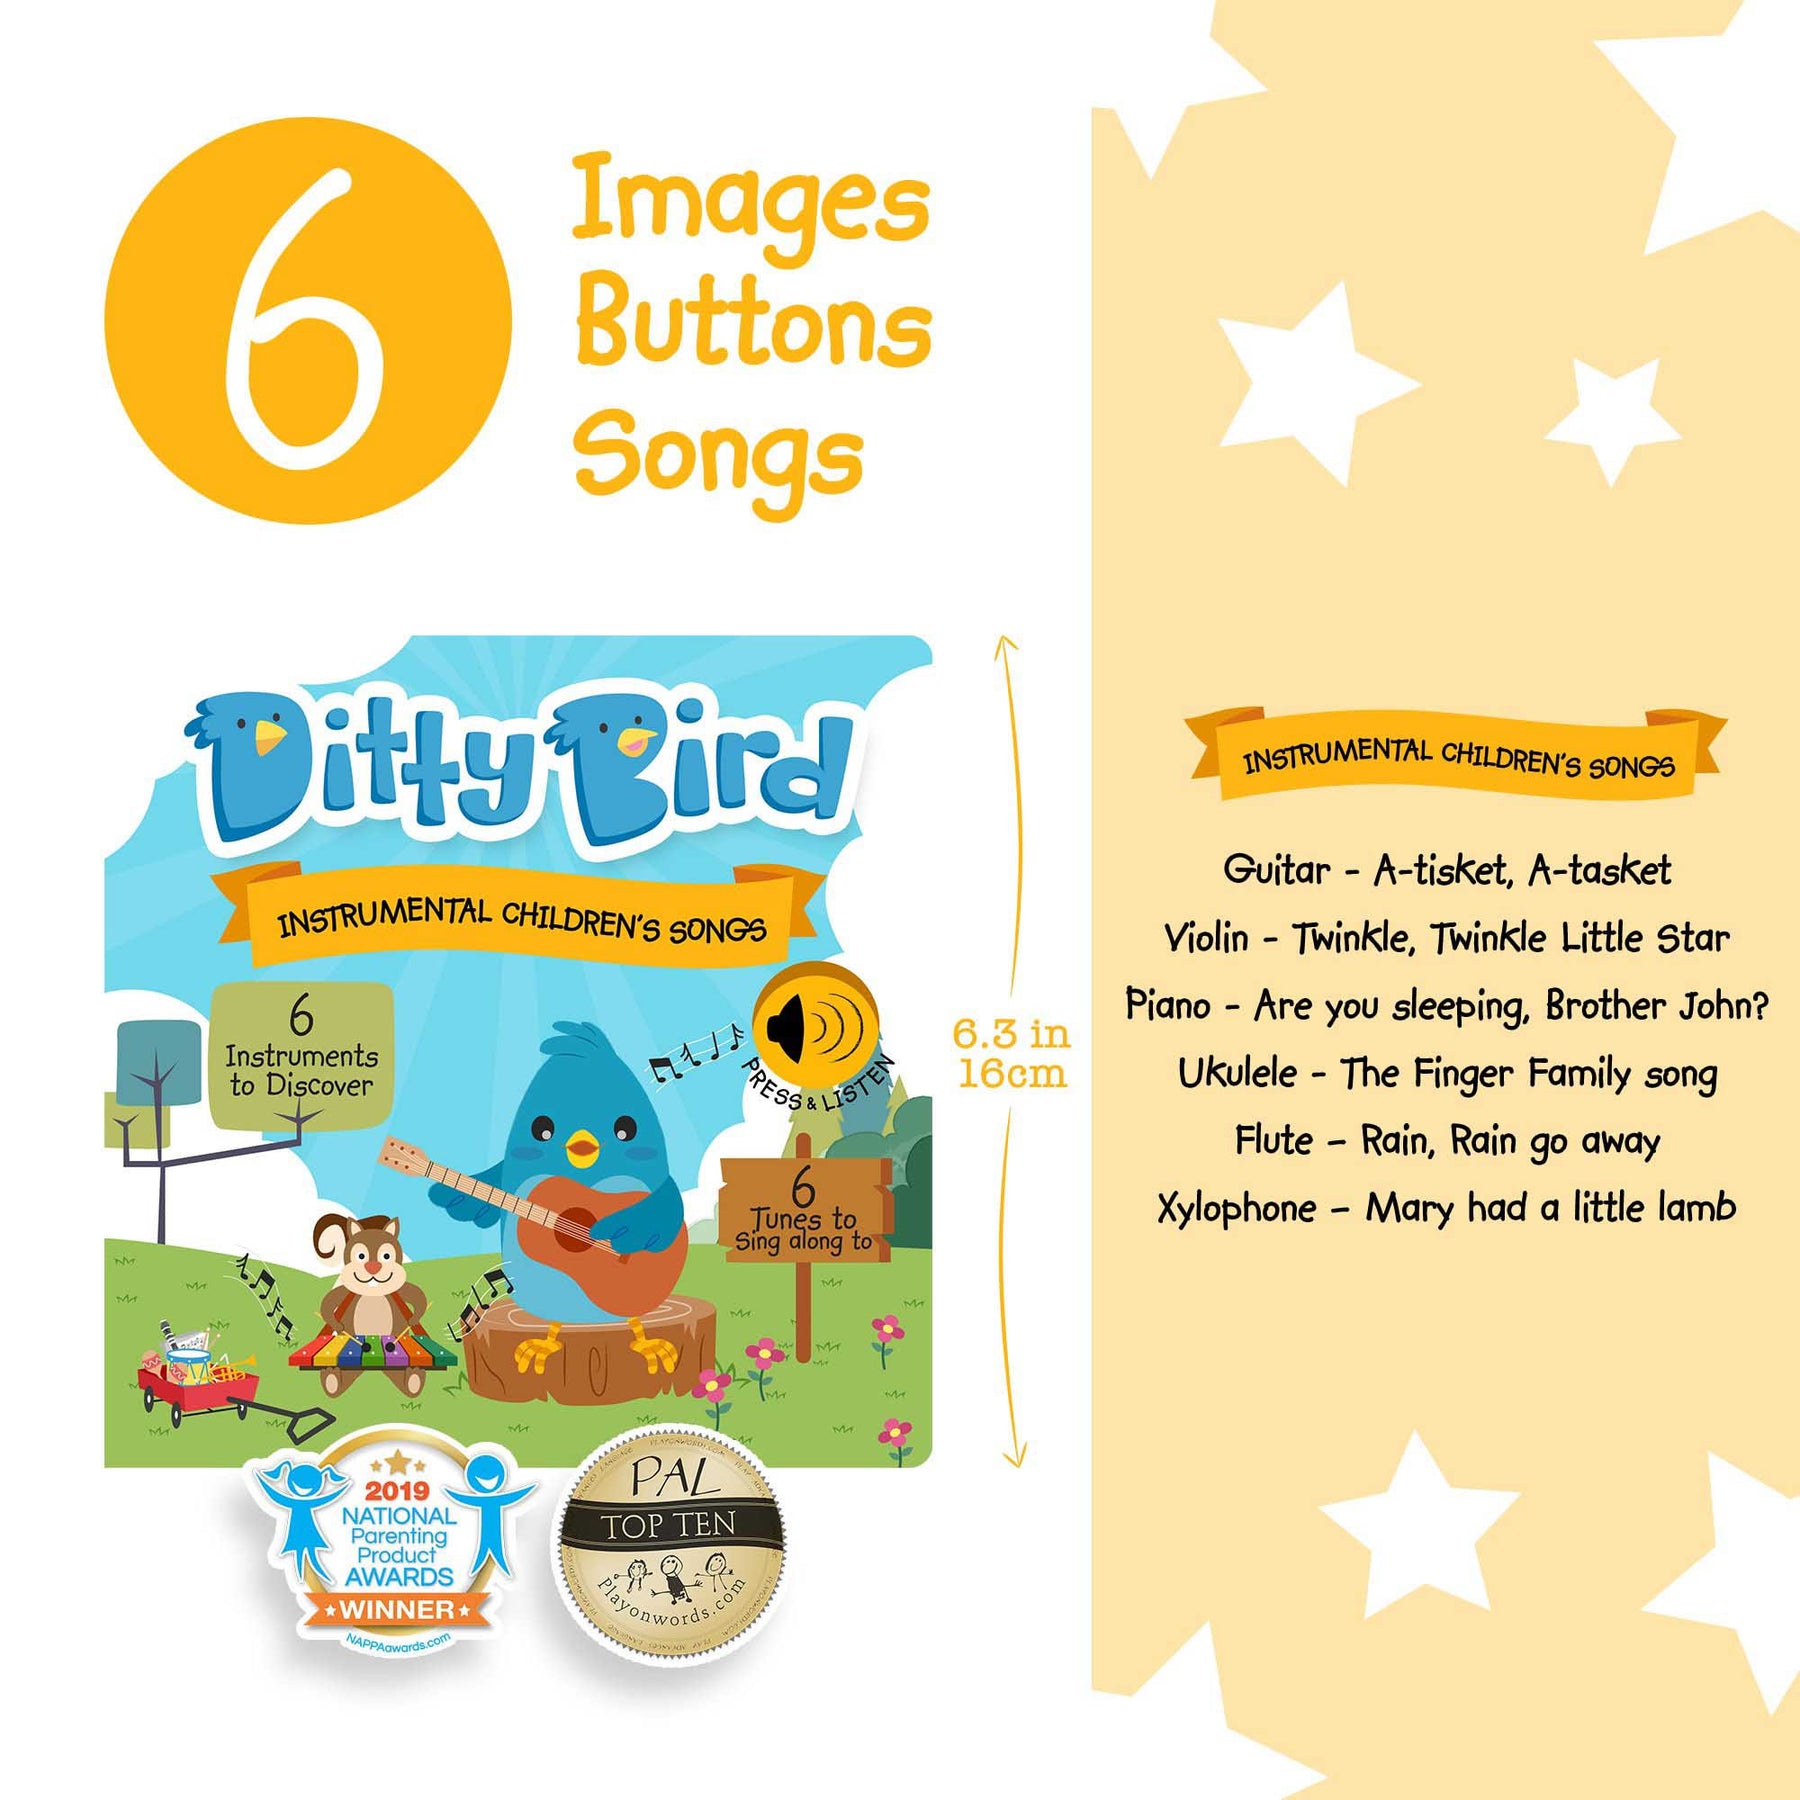 Ditty Bird Instrumental Children Songs Book [Authentic] - Audio Sound Book for Children Ages 1+ Ready Stocks [B1-3 OTHERS]